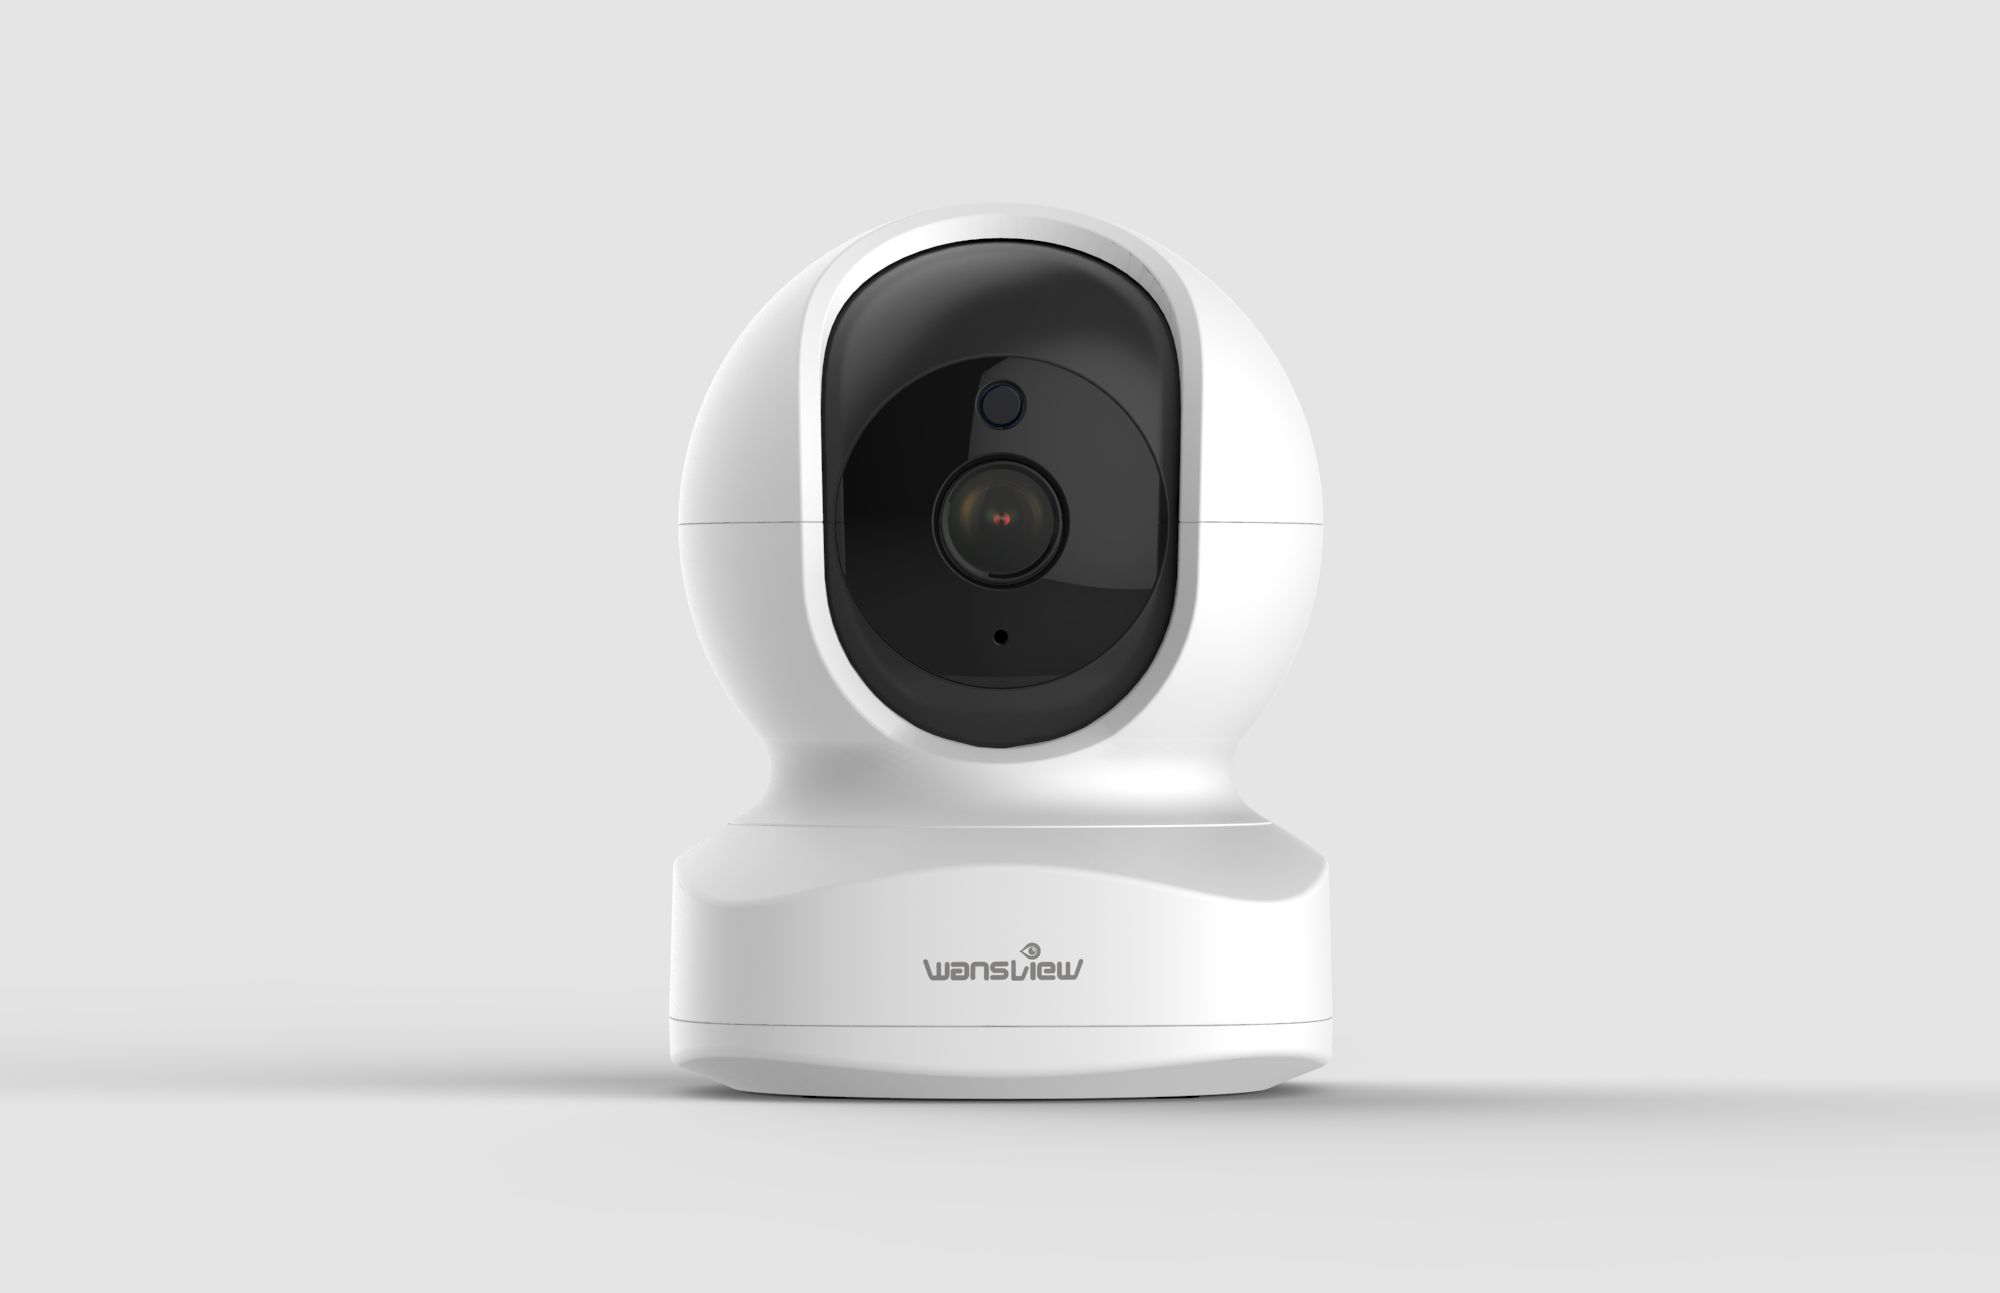 How to use the wireless network camera